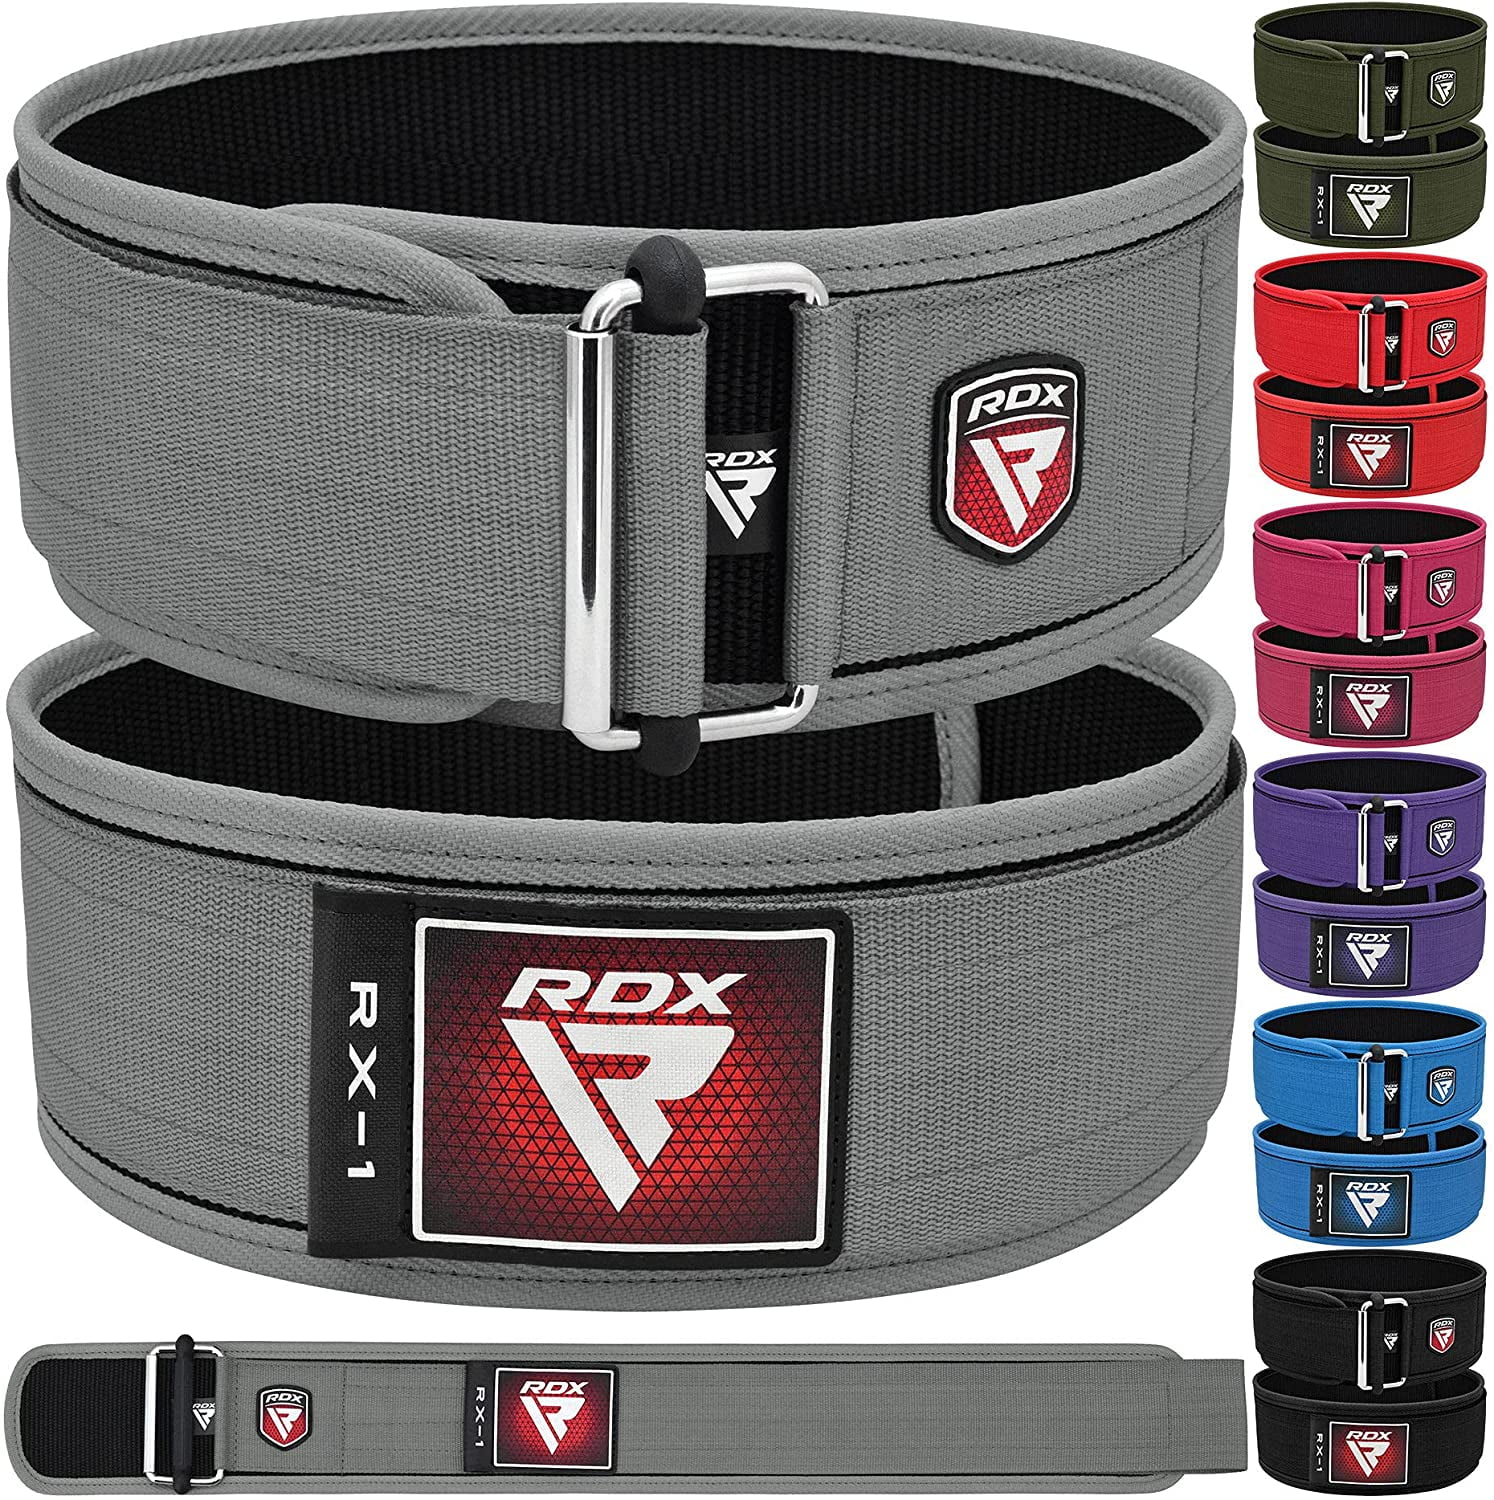 Details about   Weight Lifting Belt with Gym Gloves Training Fitness Bodybuilding Workout Set 